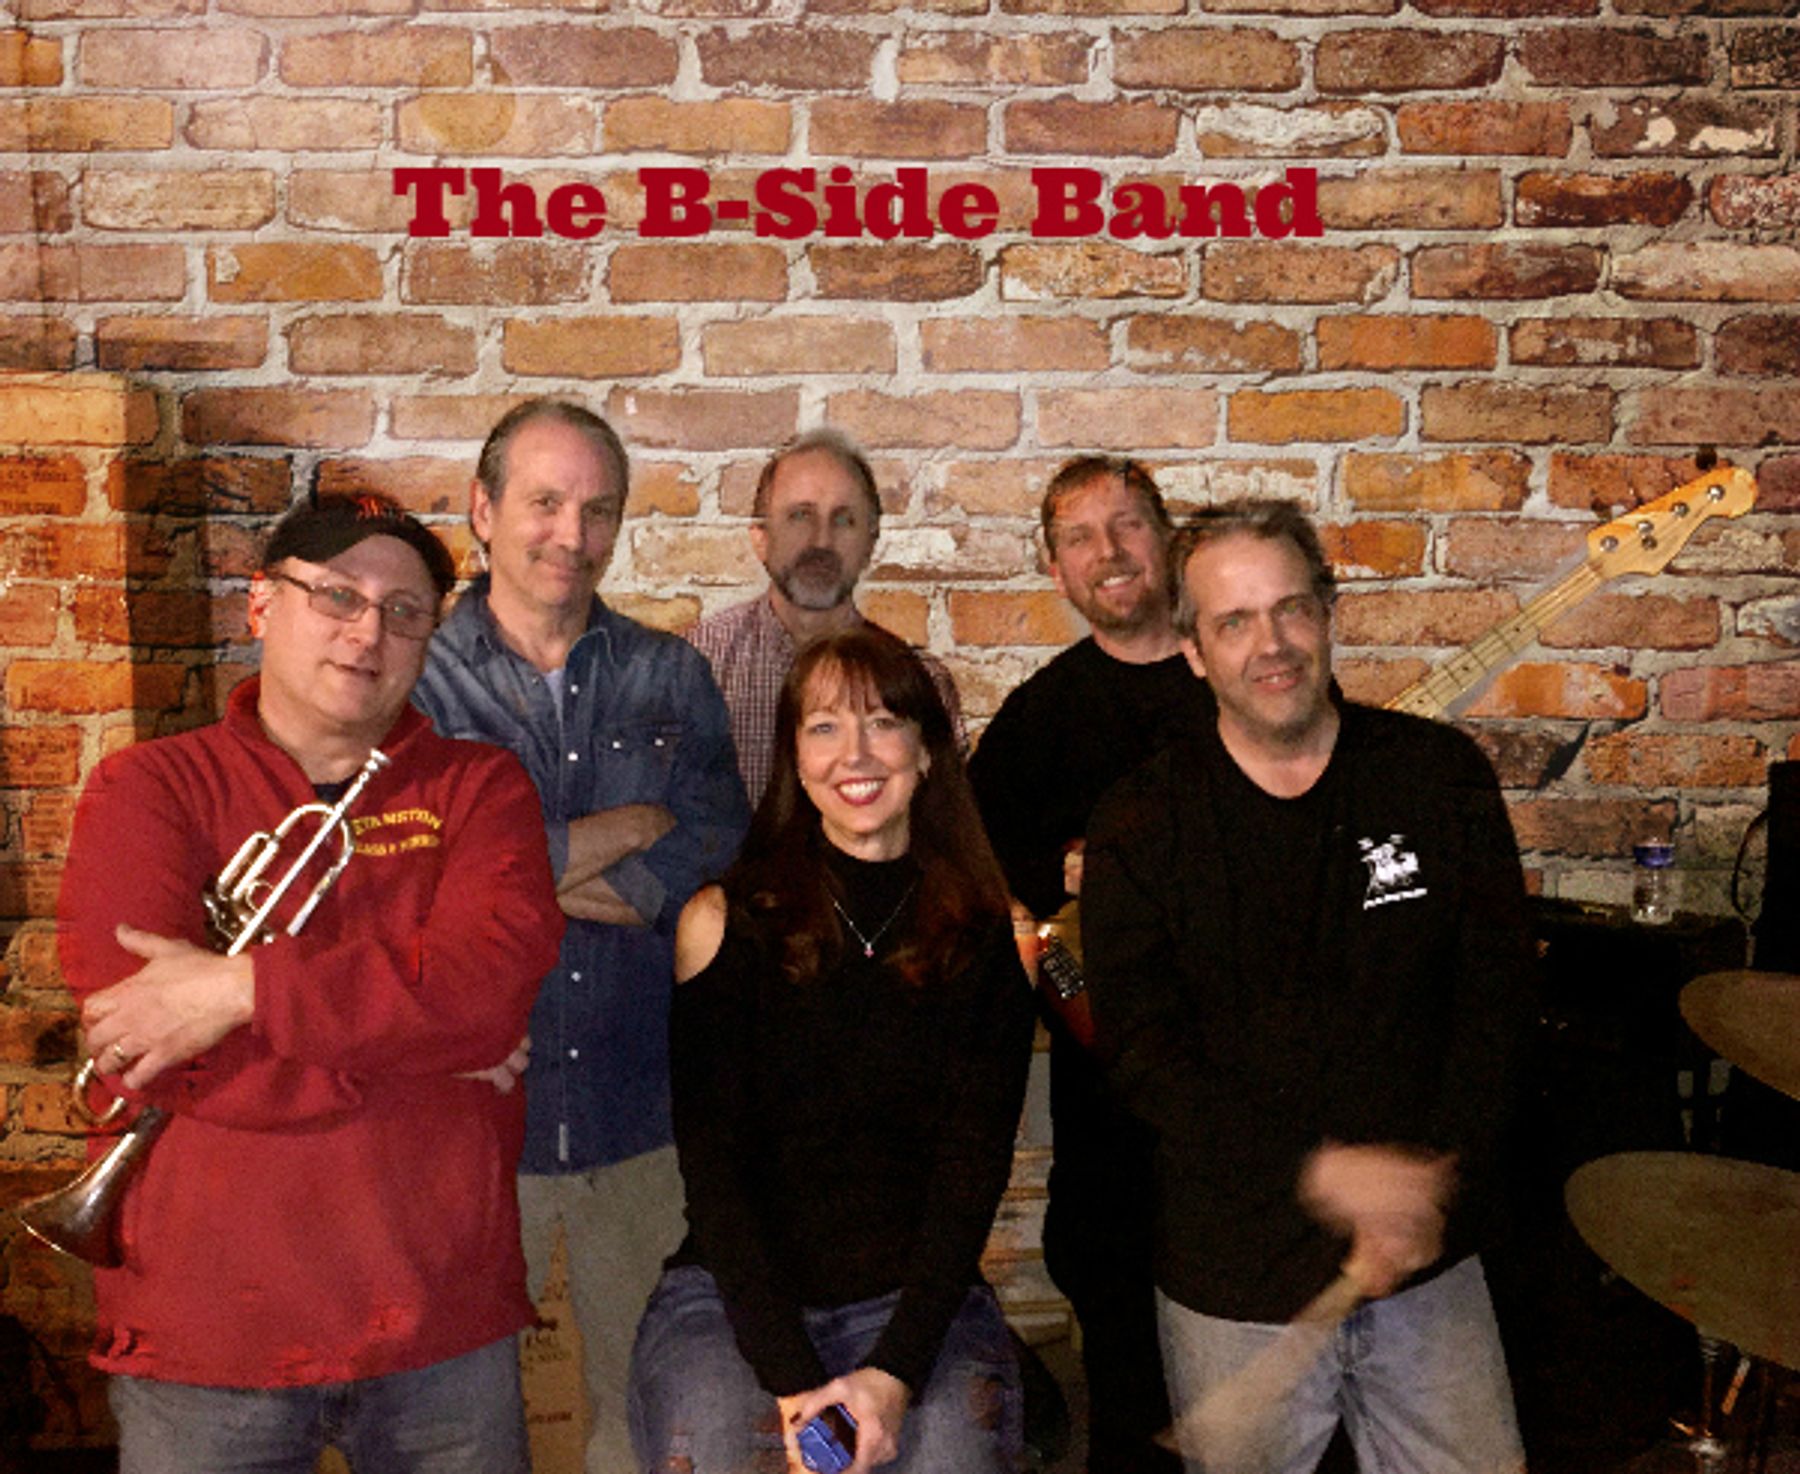 The B-Side Band